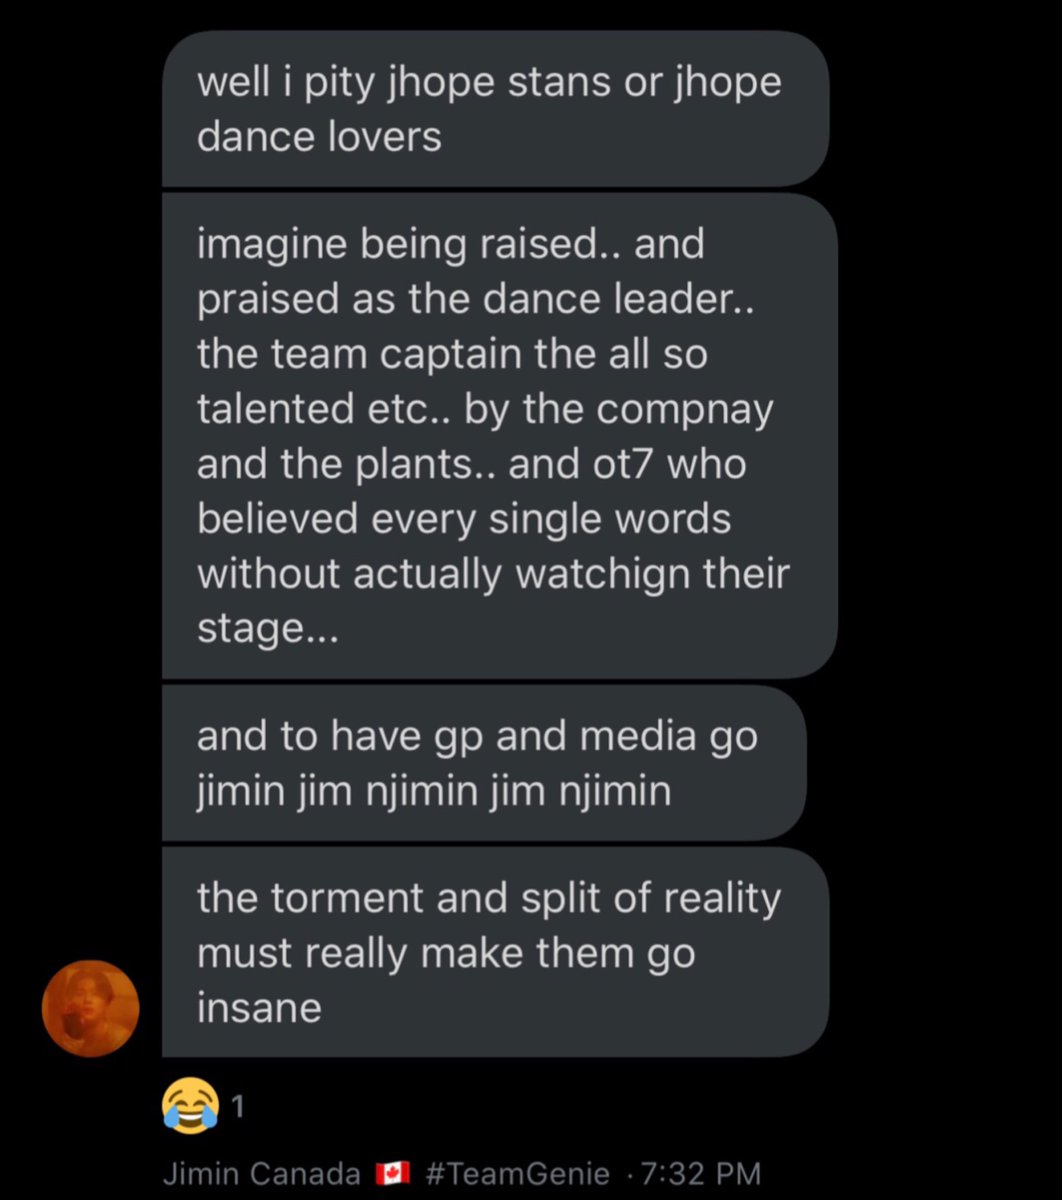 they said they “pity” h/obi stans because they think he’s a such good dancer and this about y/g too